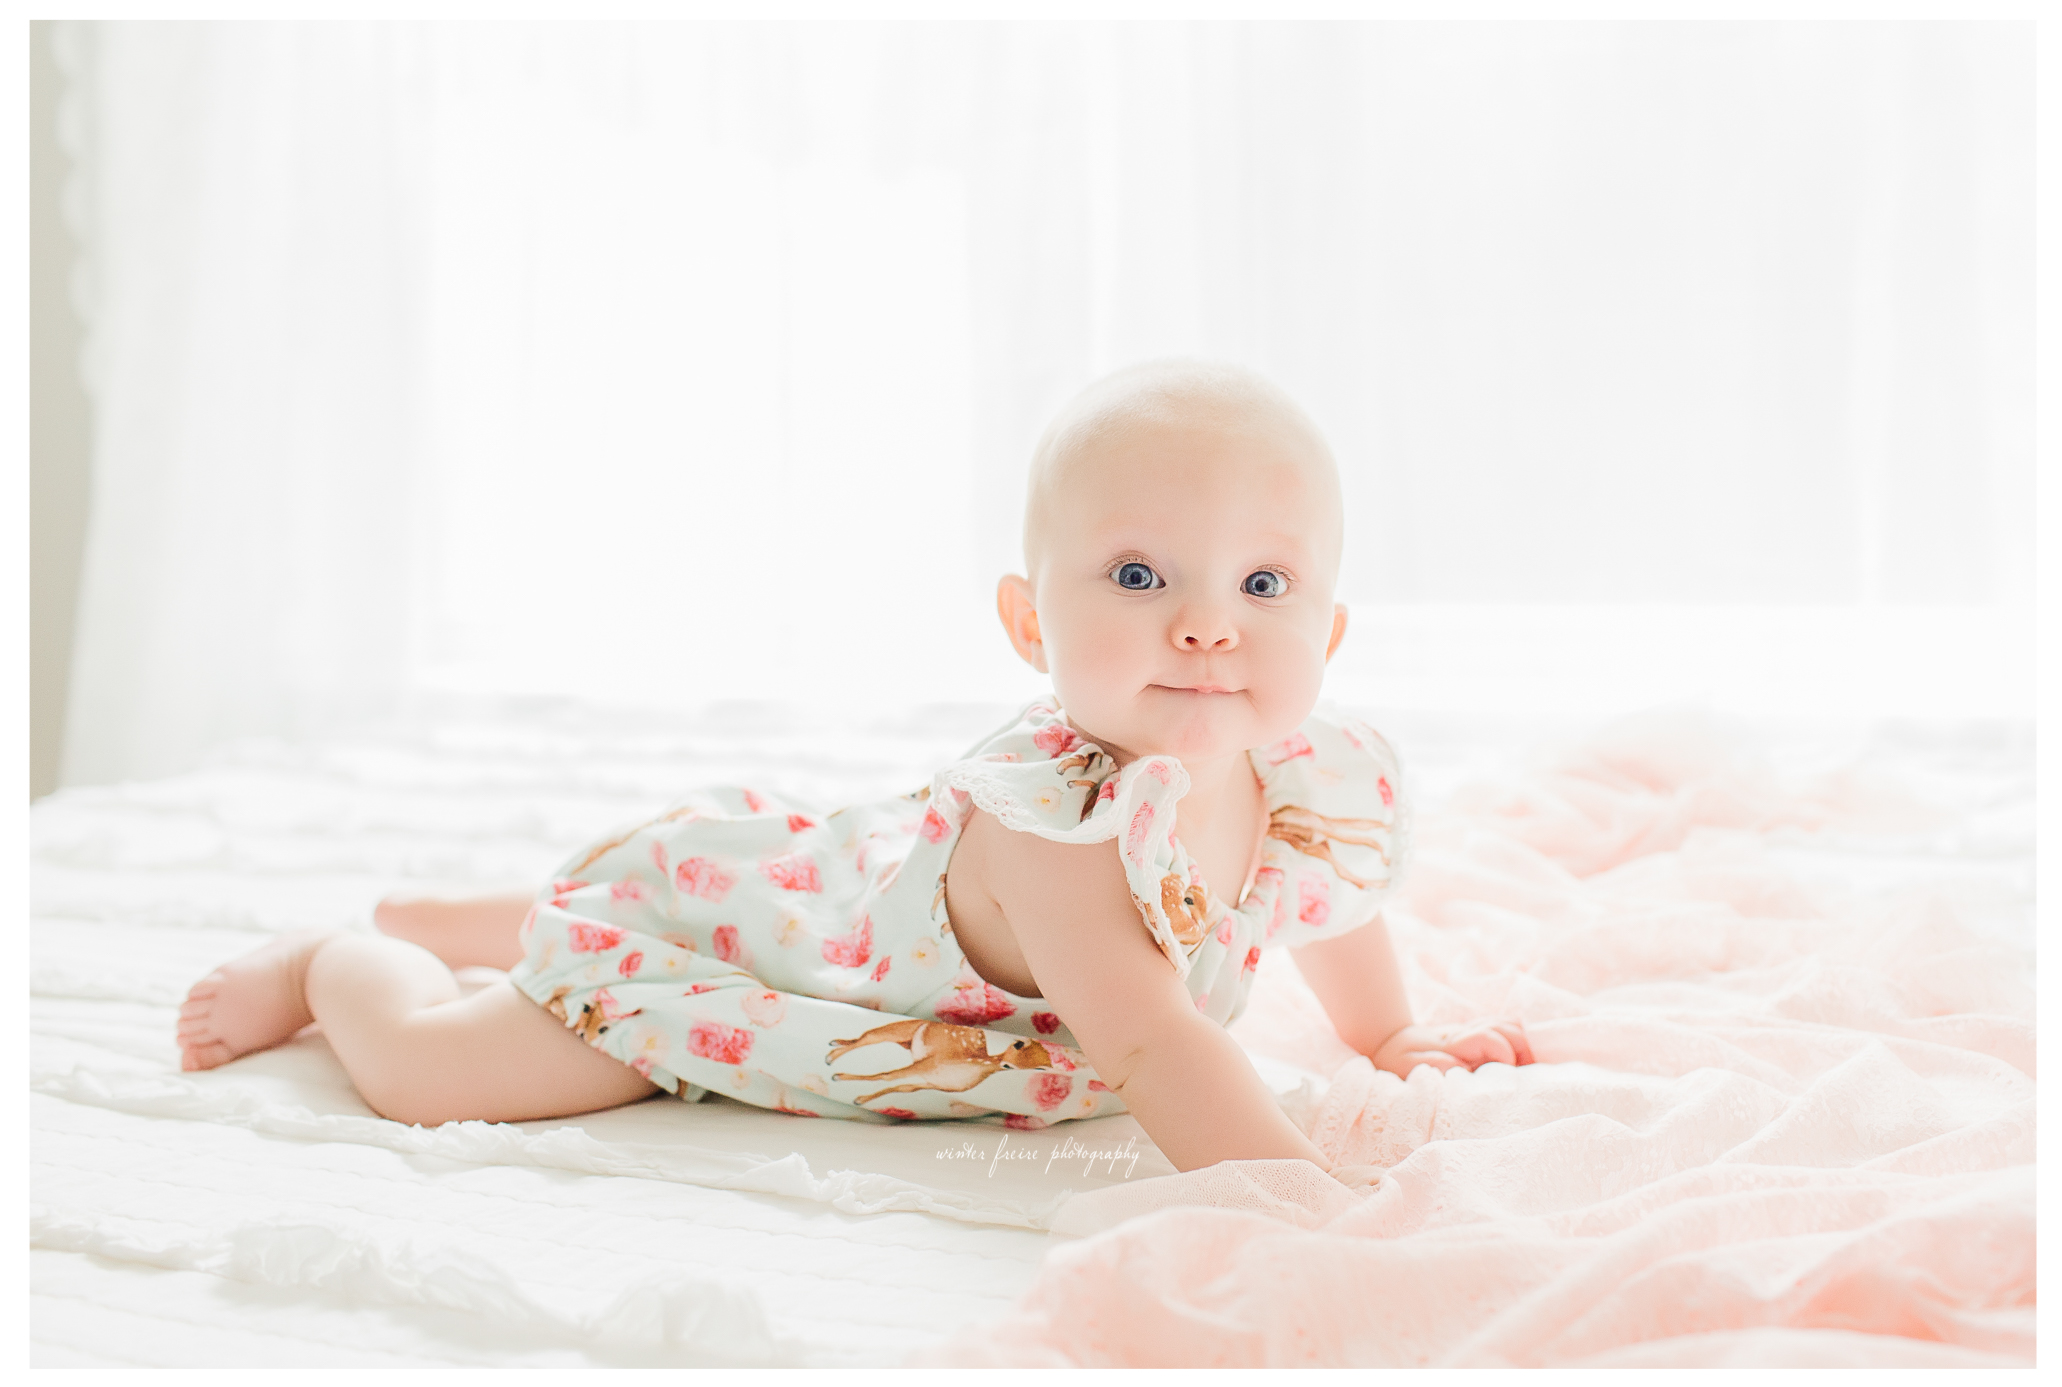 Winter Freire Photography | Sweet Pure Organic | Dayton, Ohio Fine Art Baby and Child Photography | Darling Baby Shop Commercial Shoot | Darling Baby Shop Summer Collection 2017